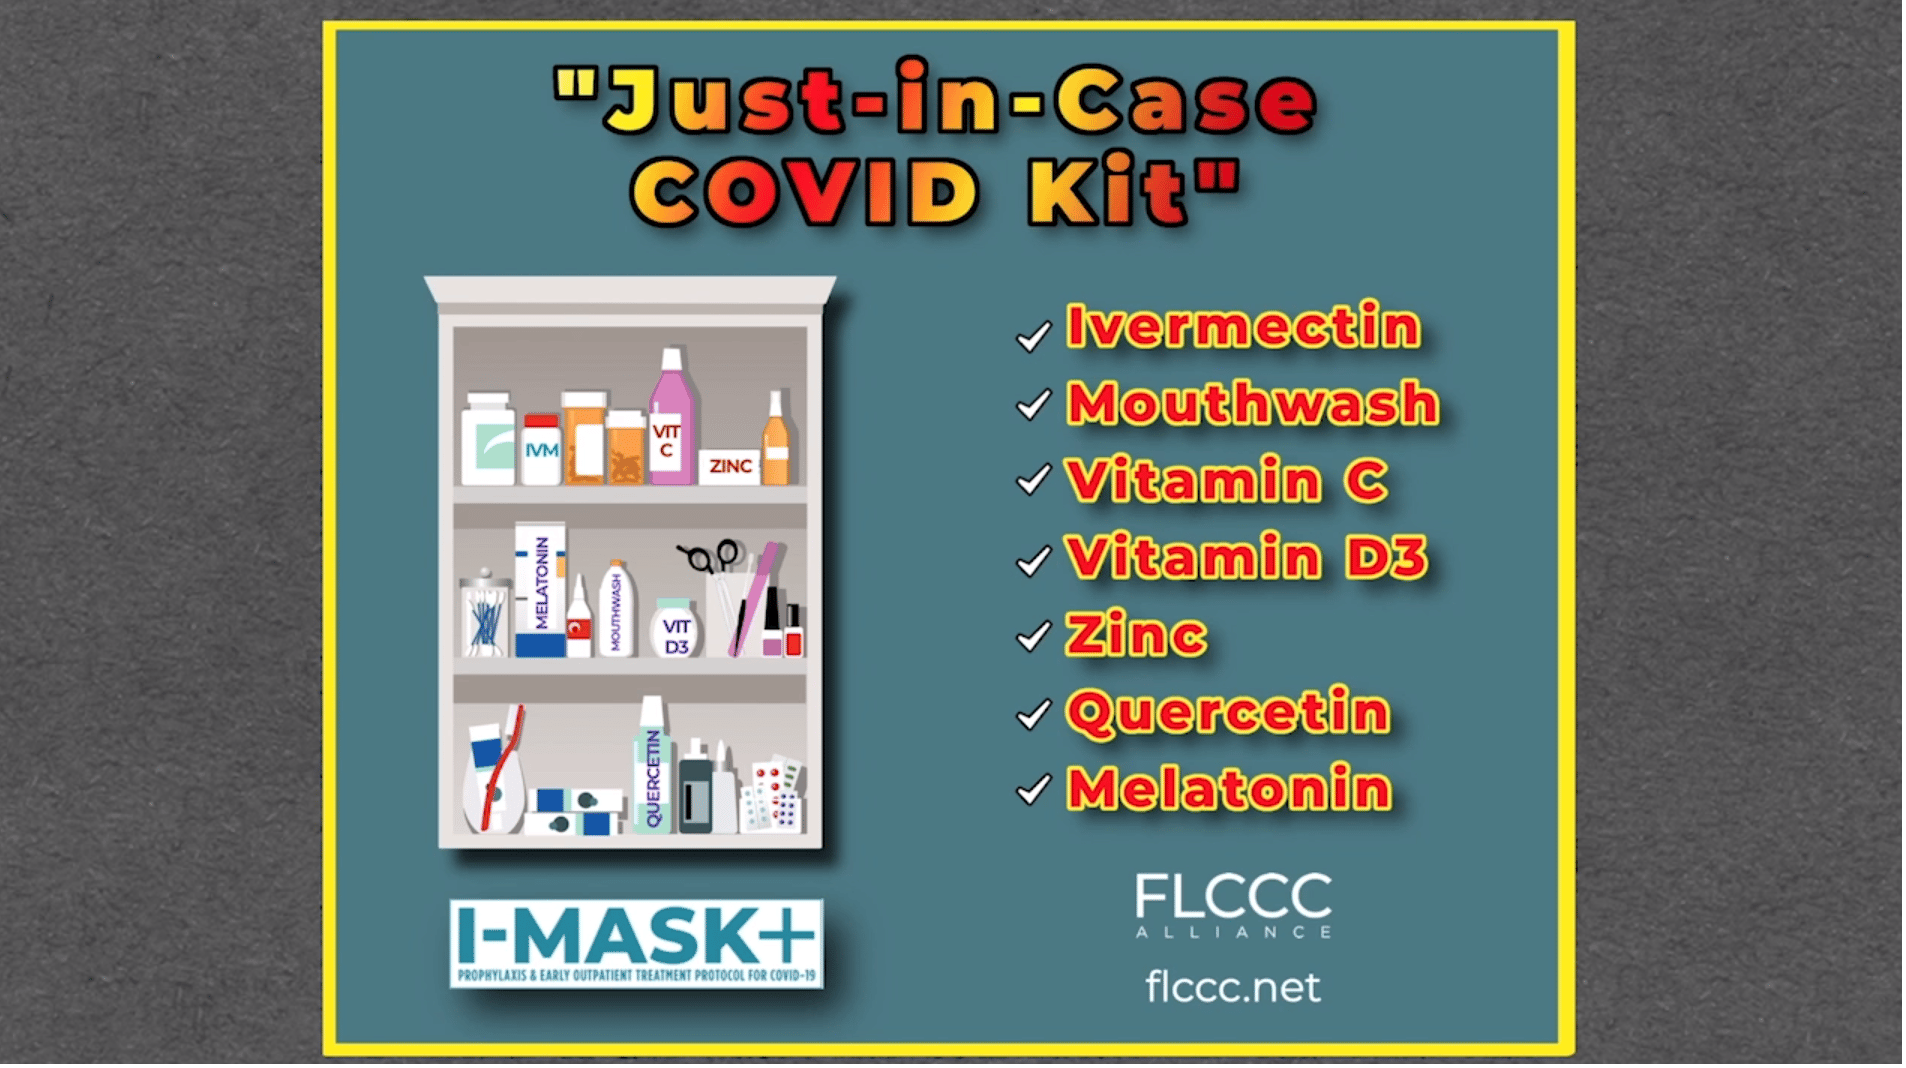 "Just-in-Case COVID Kit graphic